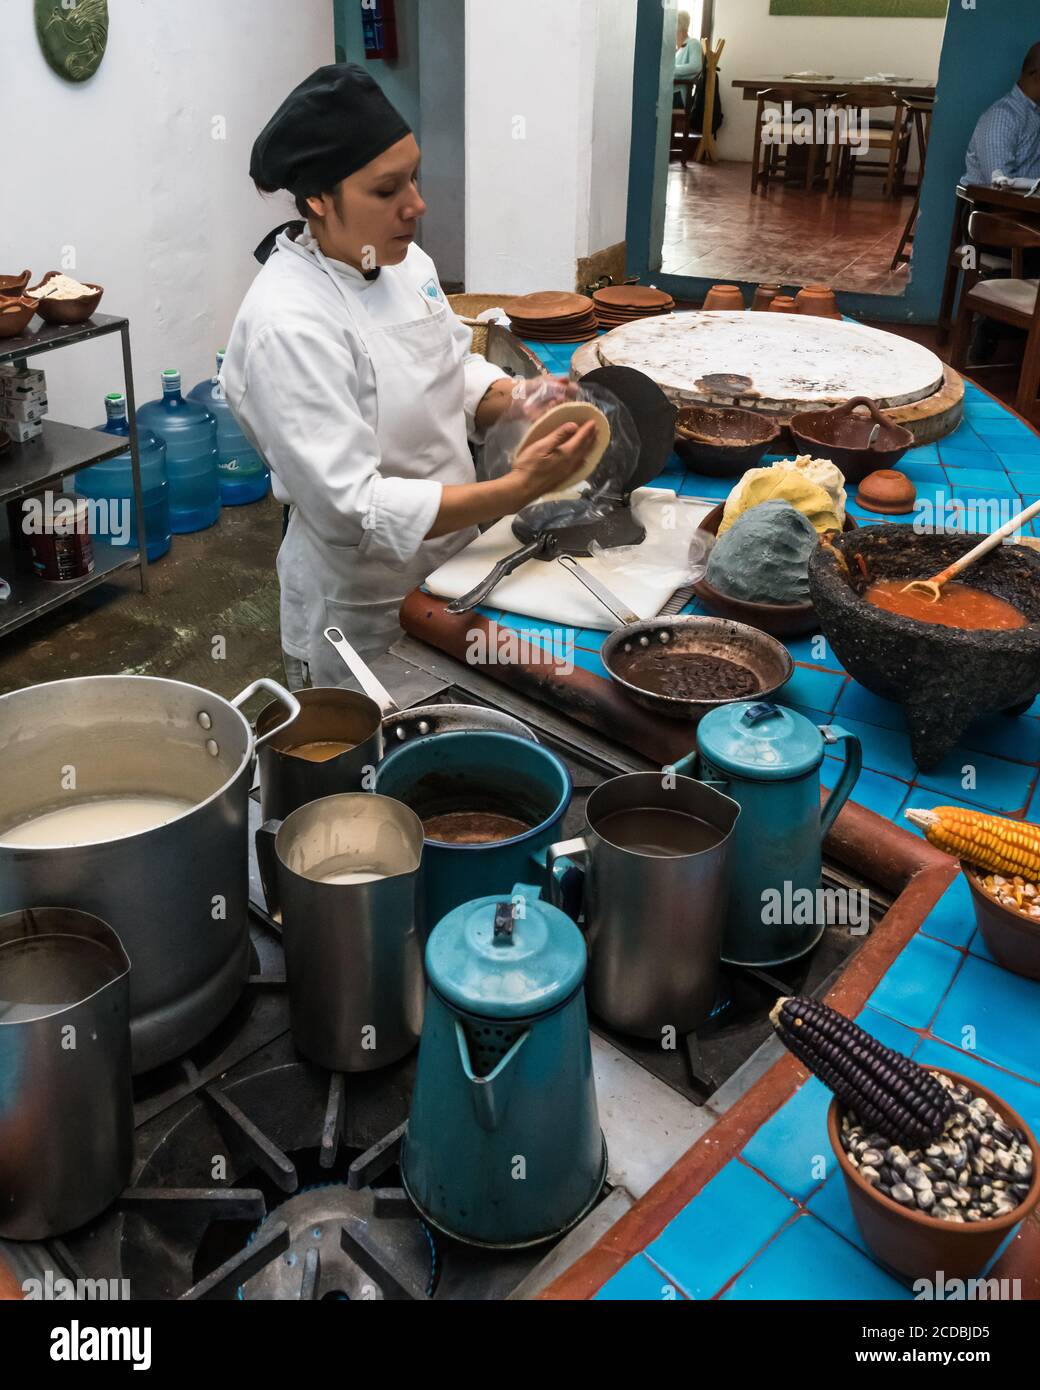 https://c8.alamy.com/comp/2CDBJD5/a-chef-make-tortillas-in-a-metal-tortilla-press-in-a-restaurant-in-oaxaca-mexico-in-front-of-her-is-corn-masa-dough-made-from-blue-yellow-and-whi-2CDBJD5.jpg